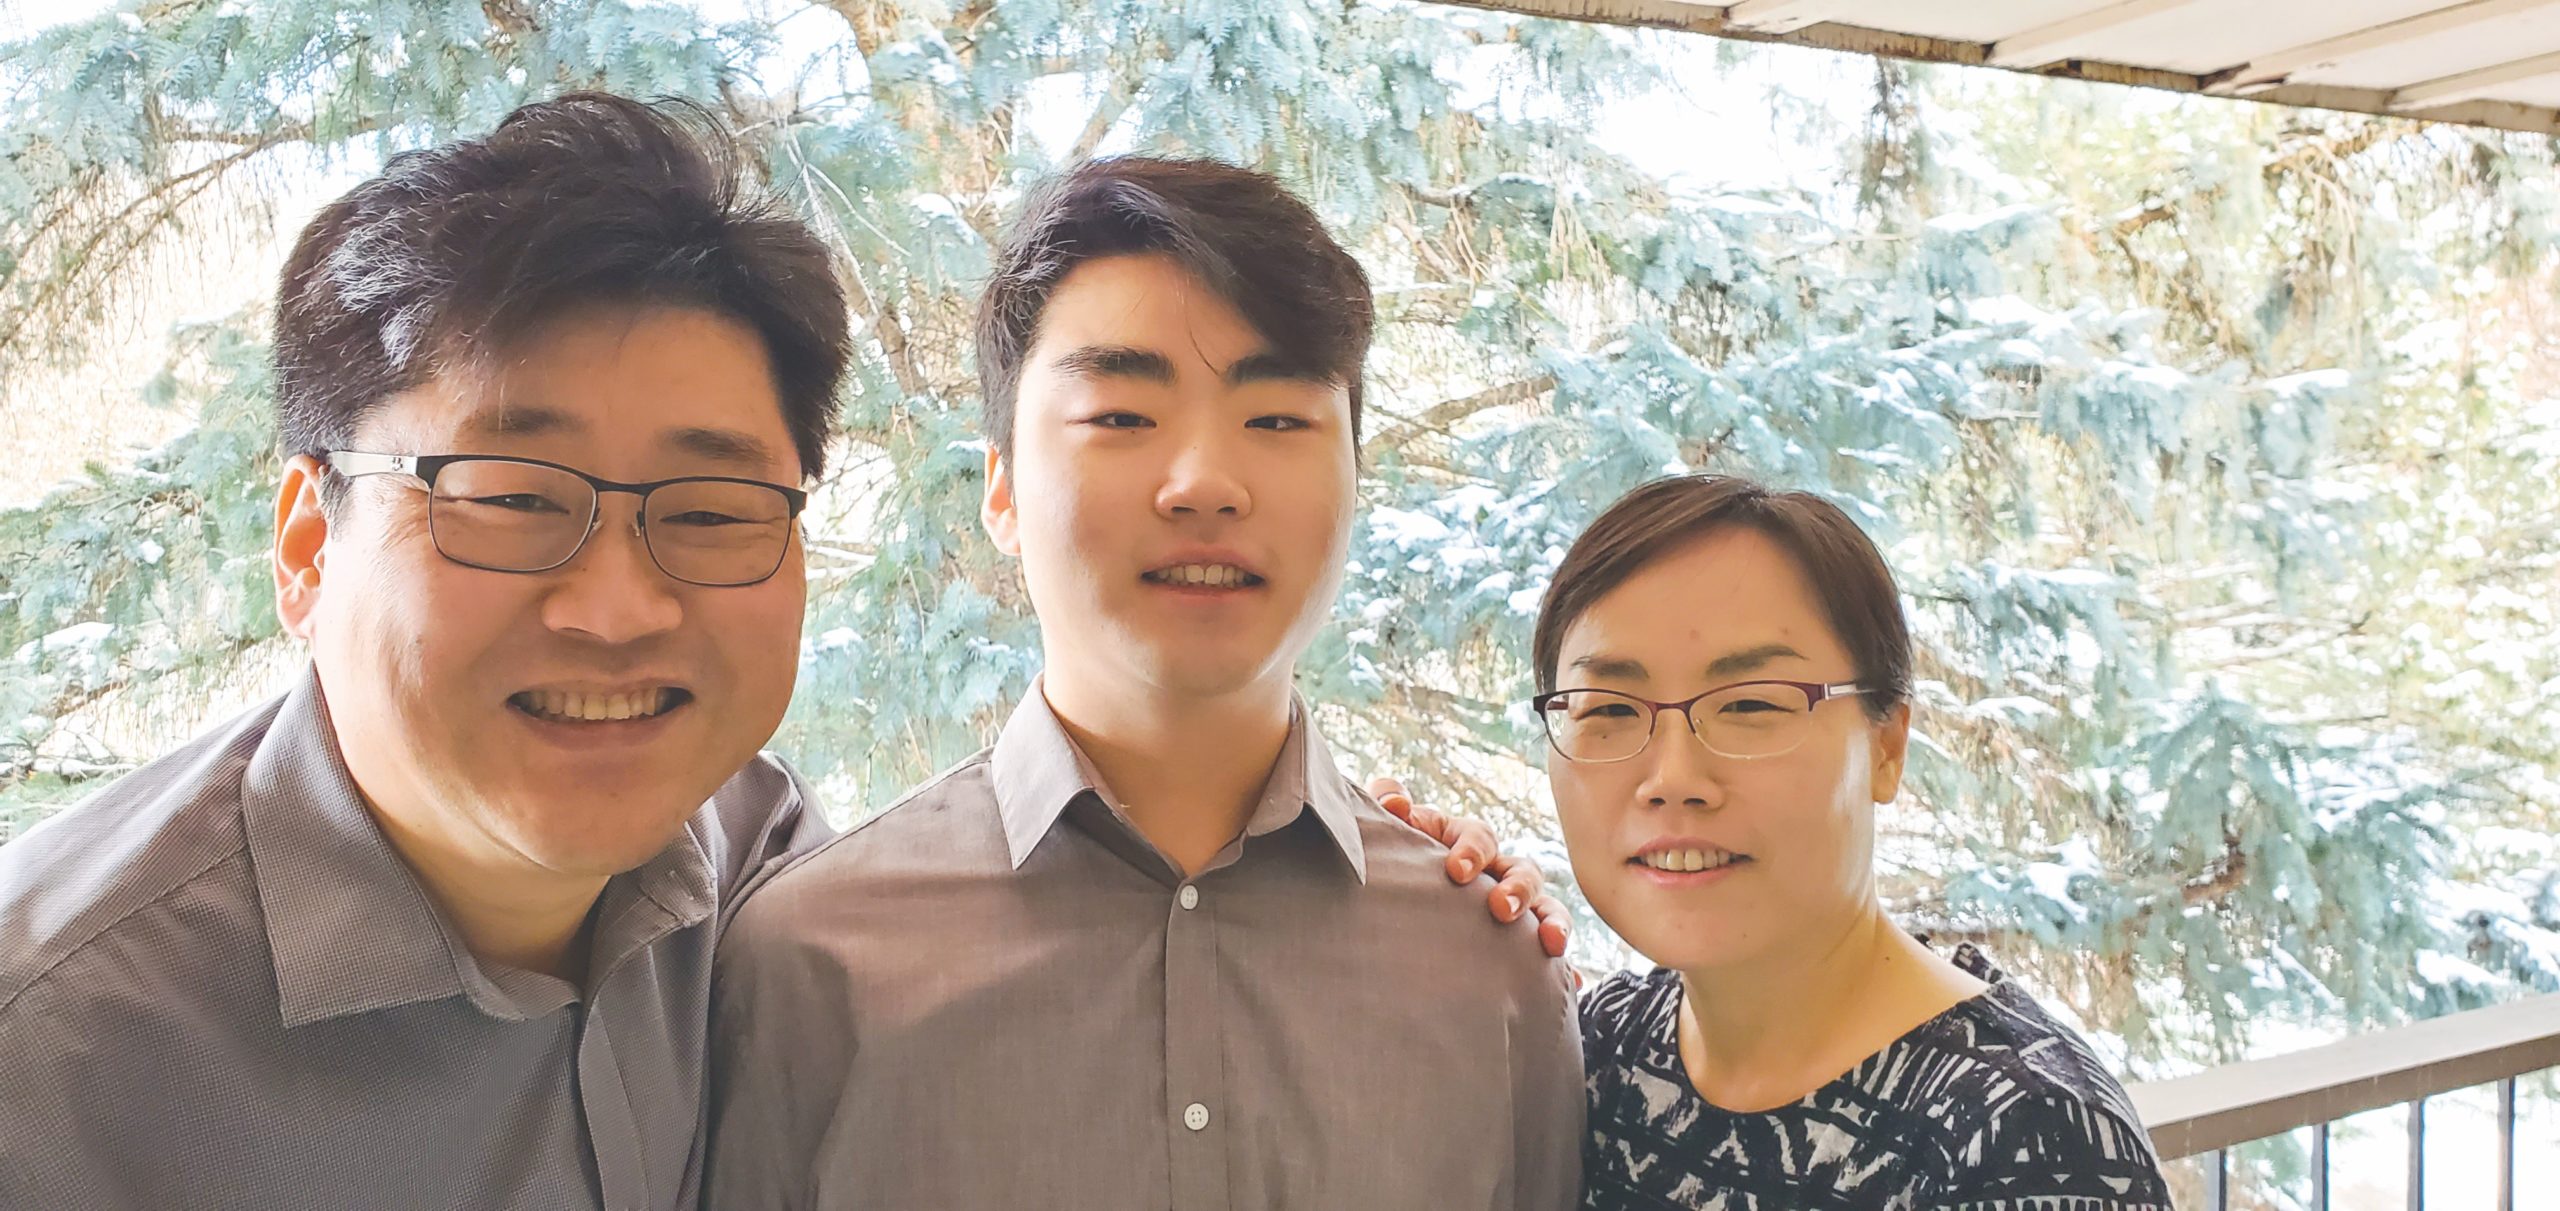 Byeong Hwa “BH” Yun with his son, Elliot Yun, and wife, Jeong-Ah Yeo.